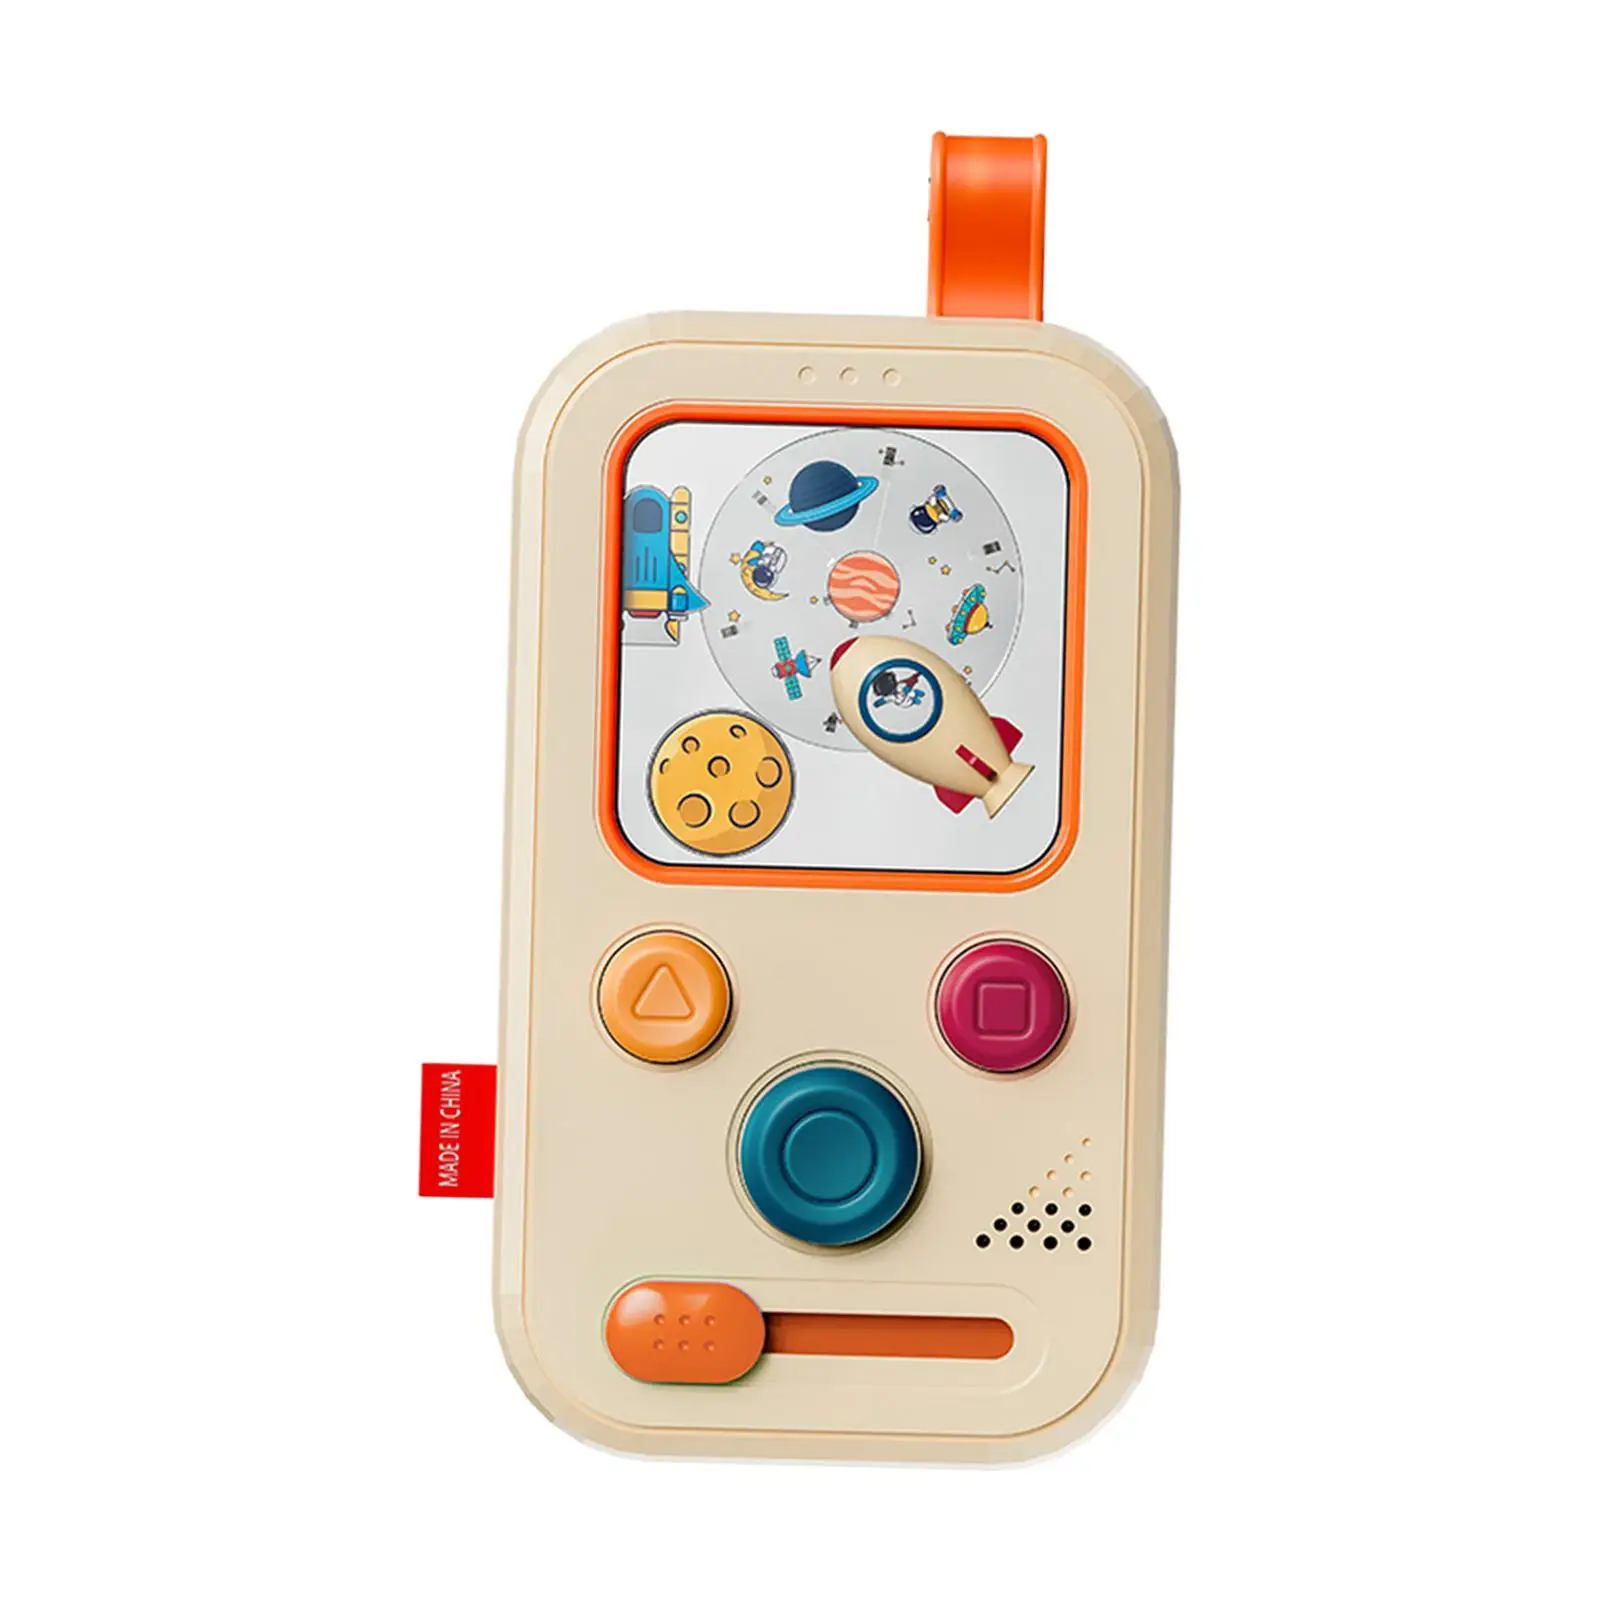 Sensory Toy Educational Puzzle Space Rocket Game Machine Toy Handheld Water Game for Gift Party Favor Bedroom Outing Baby